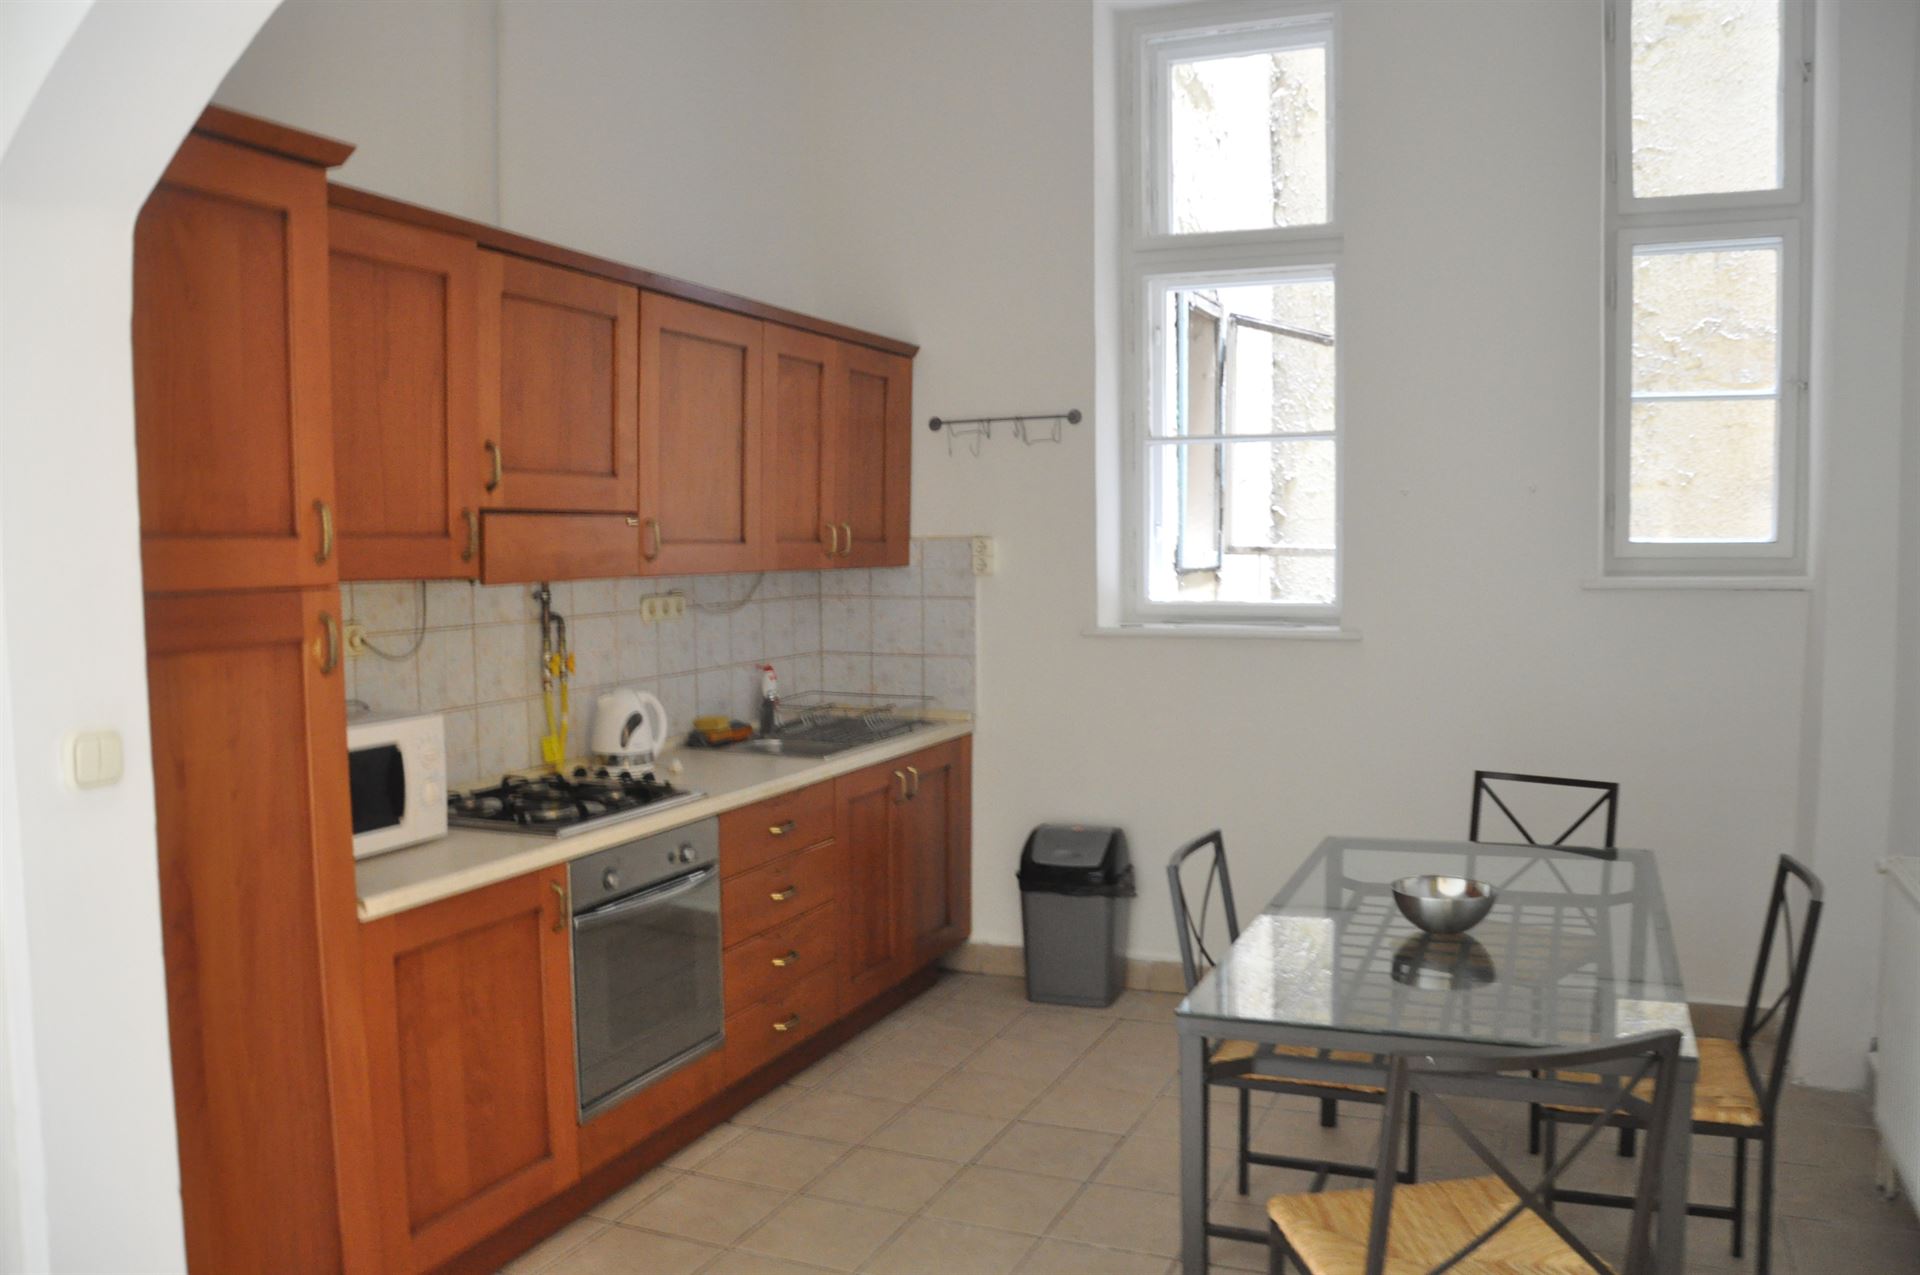 budapest-apartment-for-sale-near-kalvin-district-5-investment-property-for-sale-real-estate-budapest-downtown13